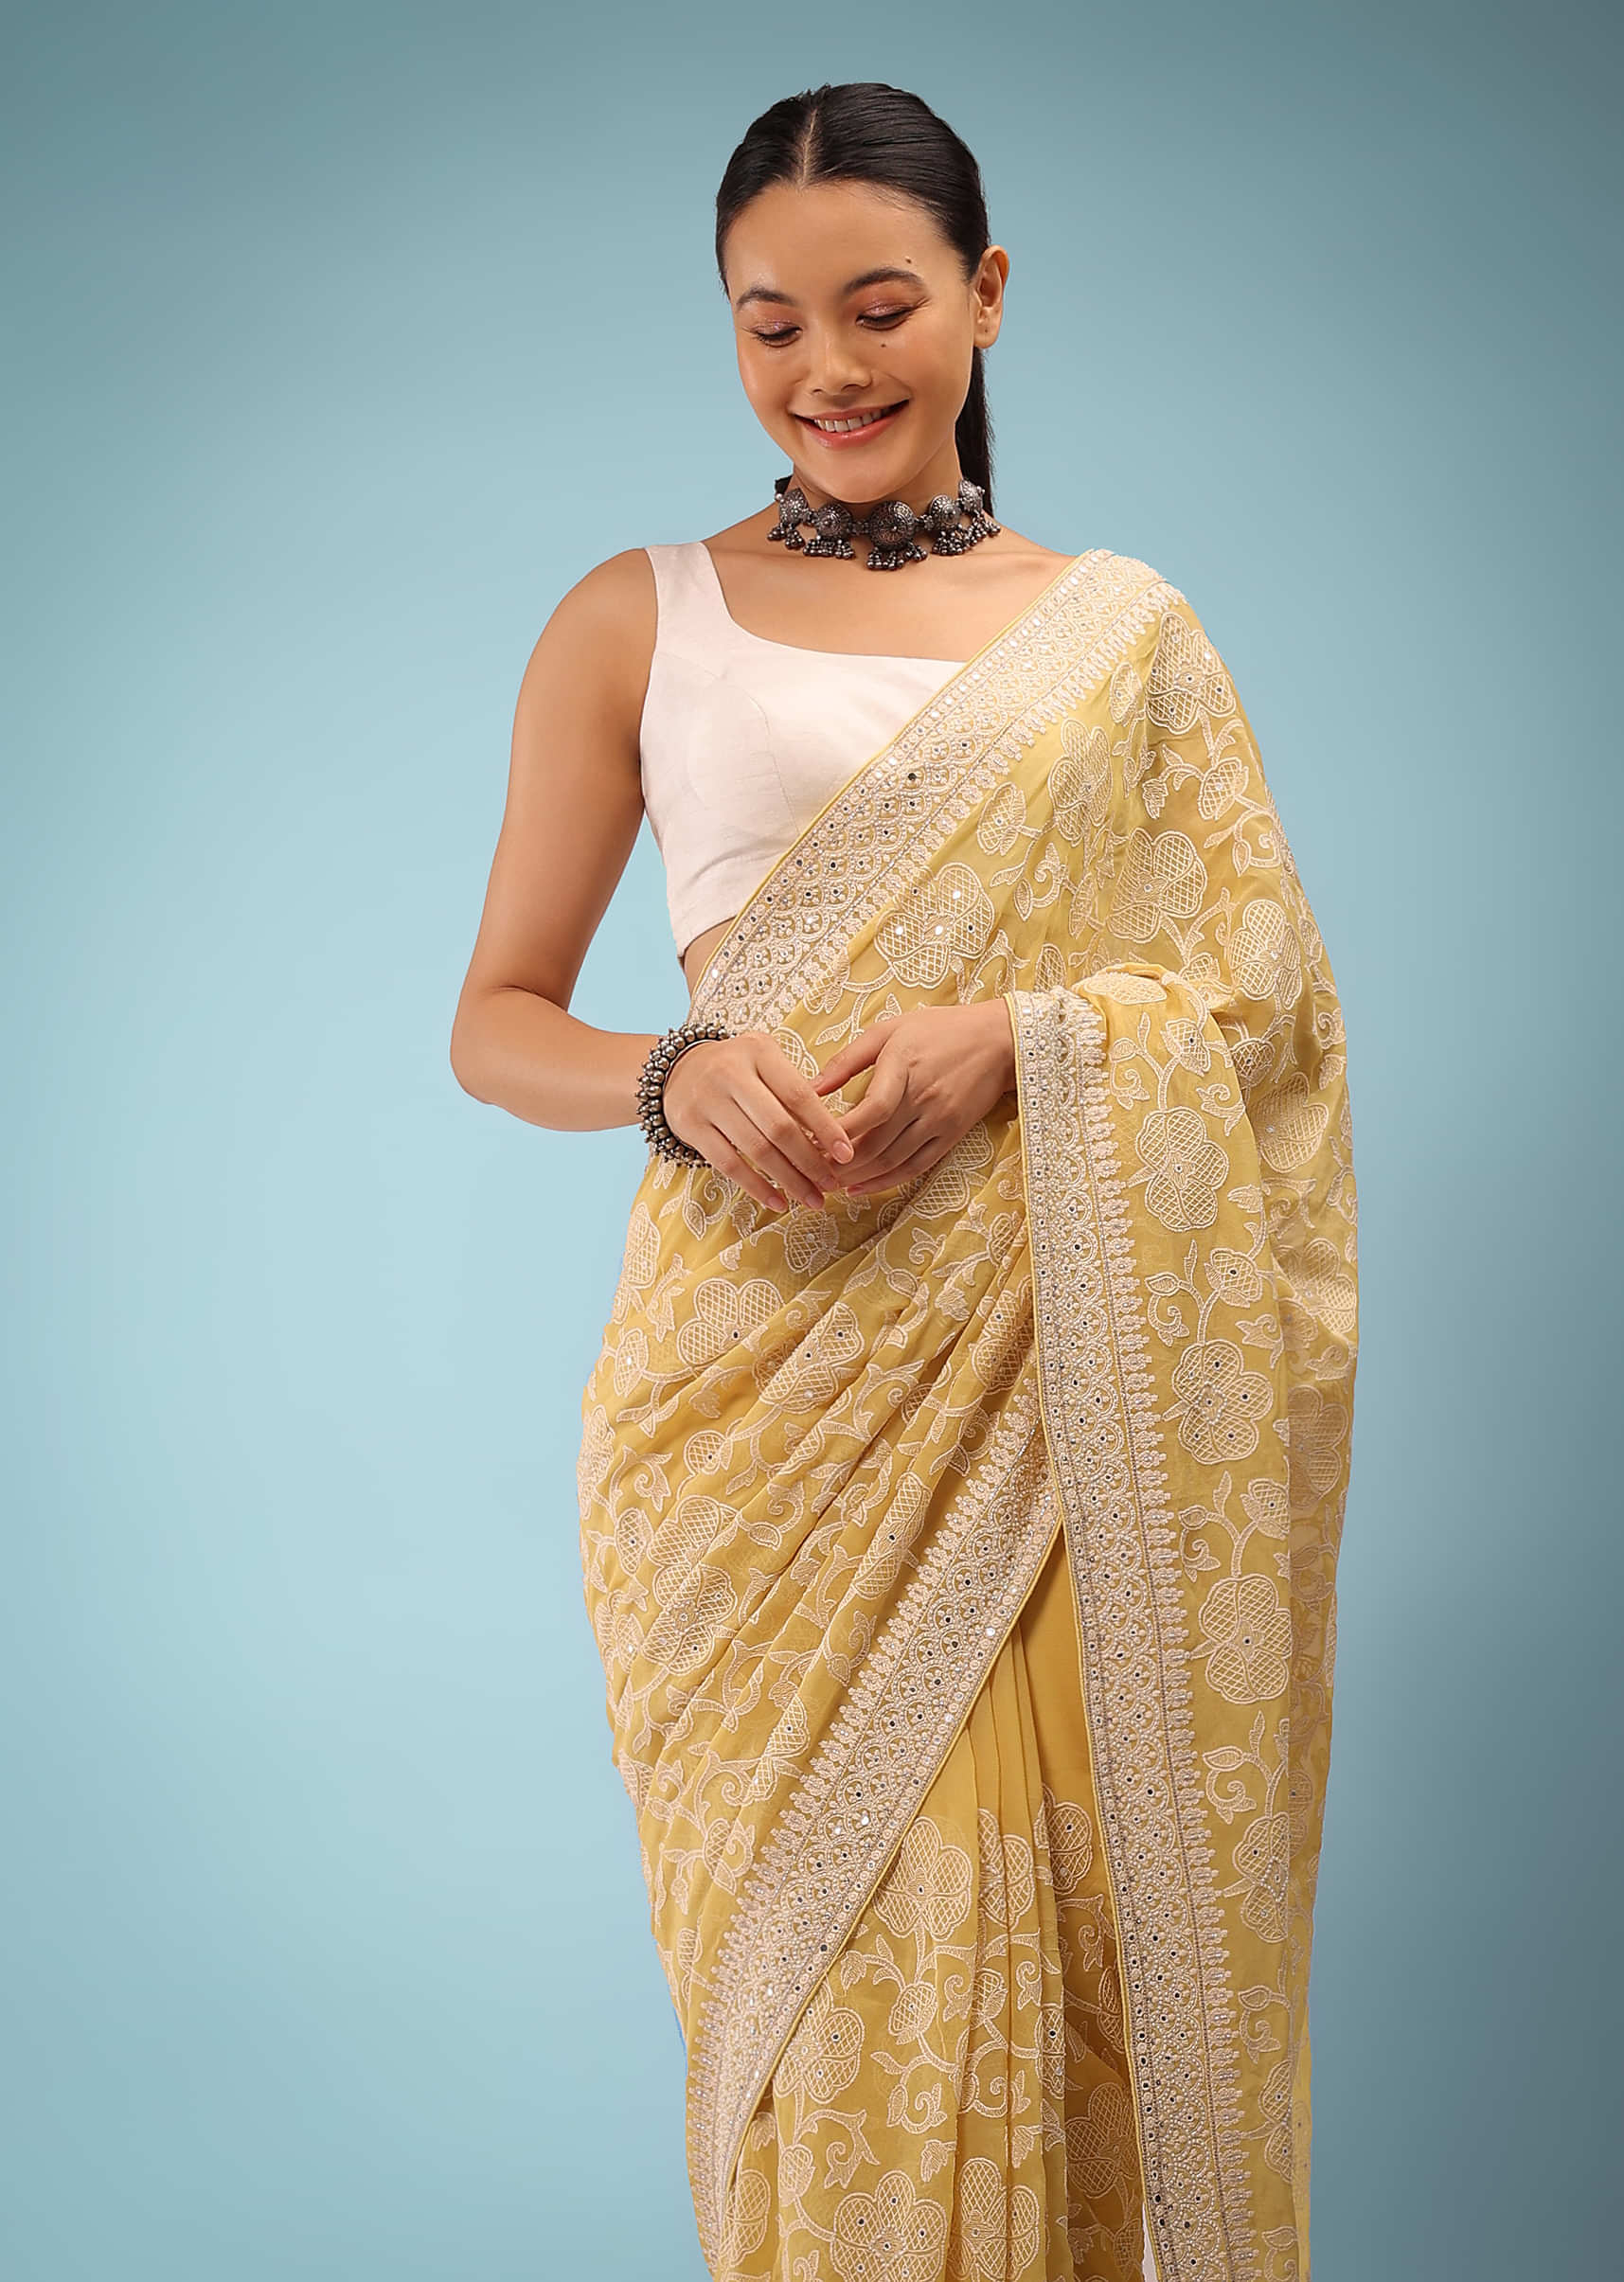 Misted Yellow Lucknowi Saree In Mirrored Work, It Comes In Cut Dana And Sequins Detailing Buttis On The Pallu.